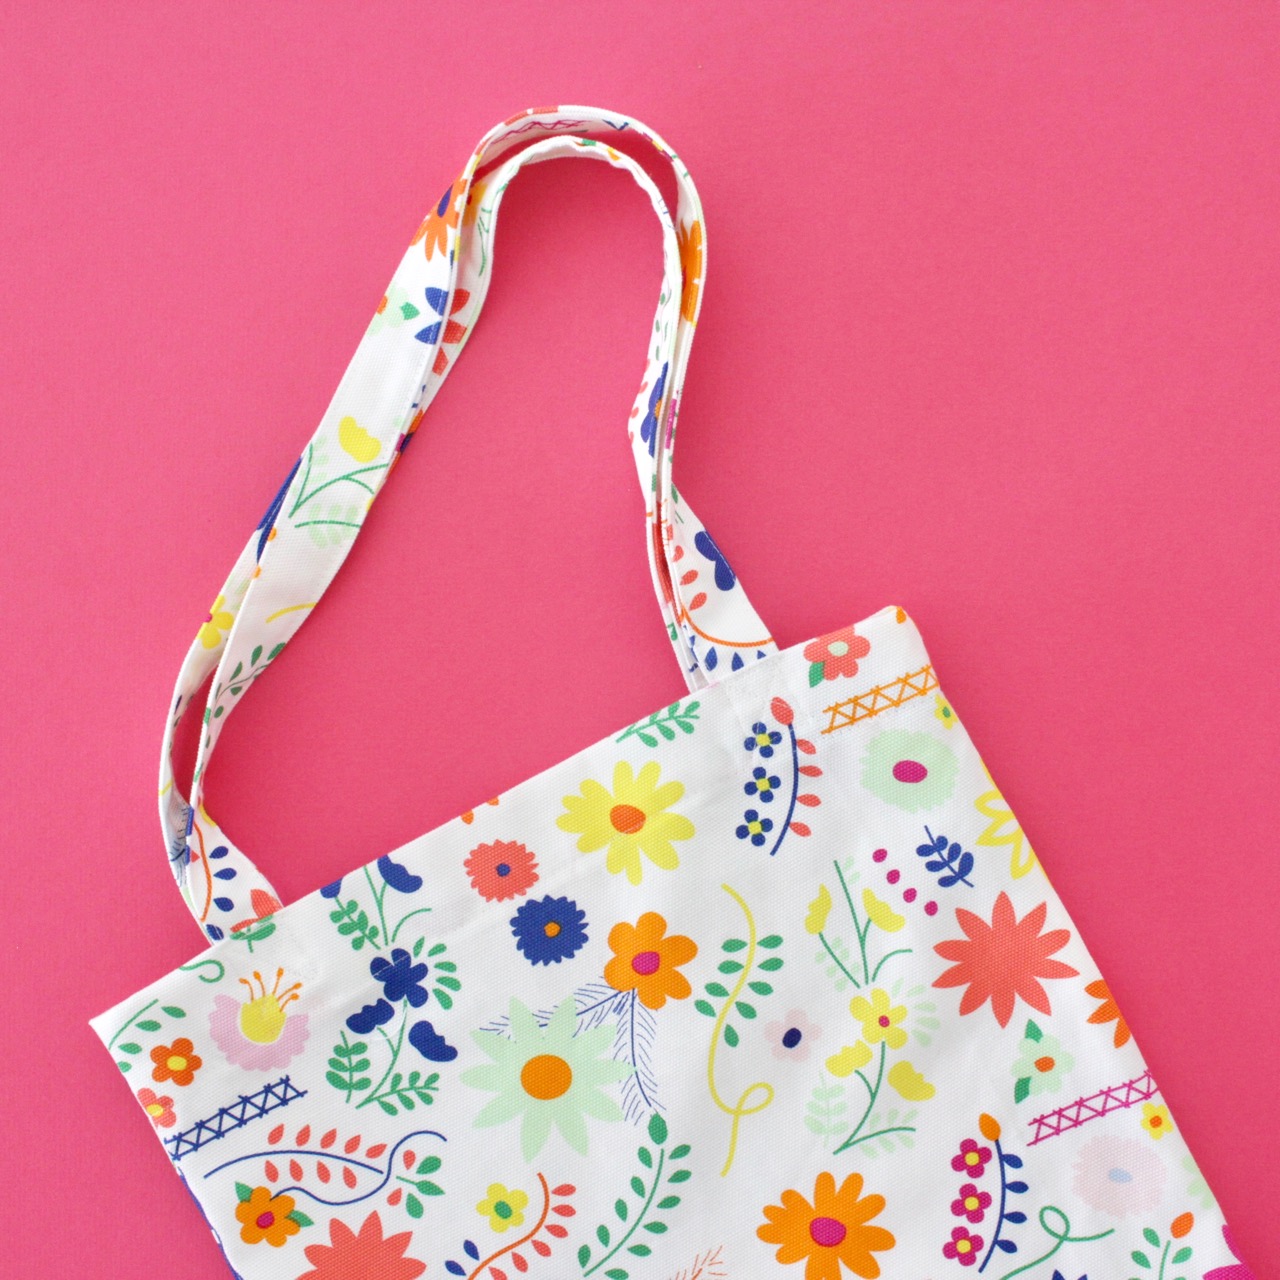 Quilt Inspiration: Free pattern day: Purses, Handbags and zipper bags